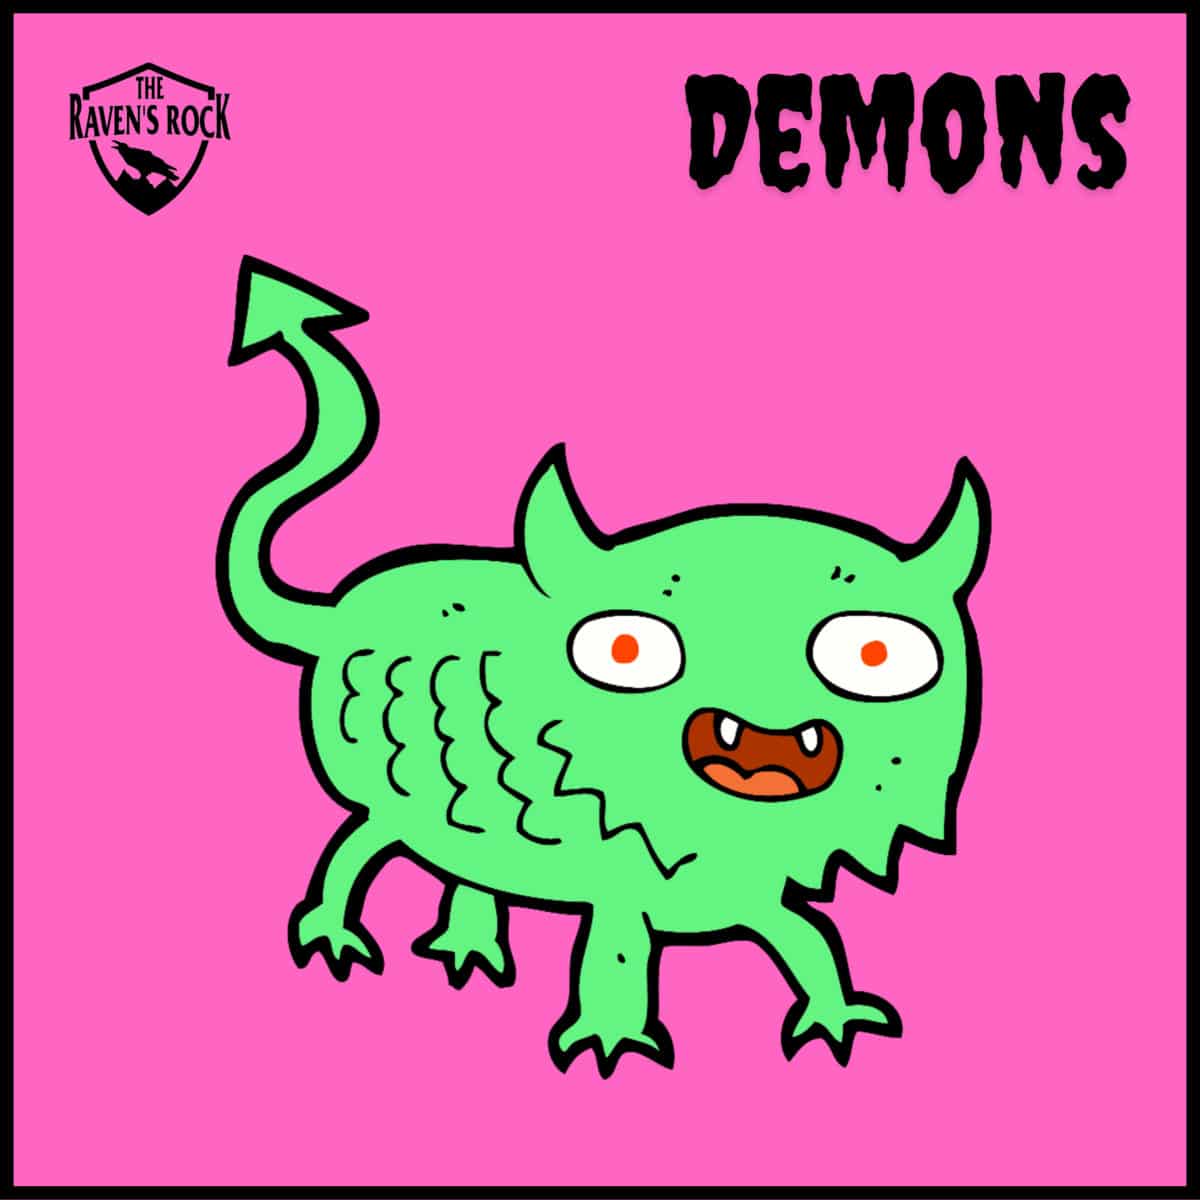 Cover art for Demons by The Raven's Rock. Vocal recording: Infidel Studios